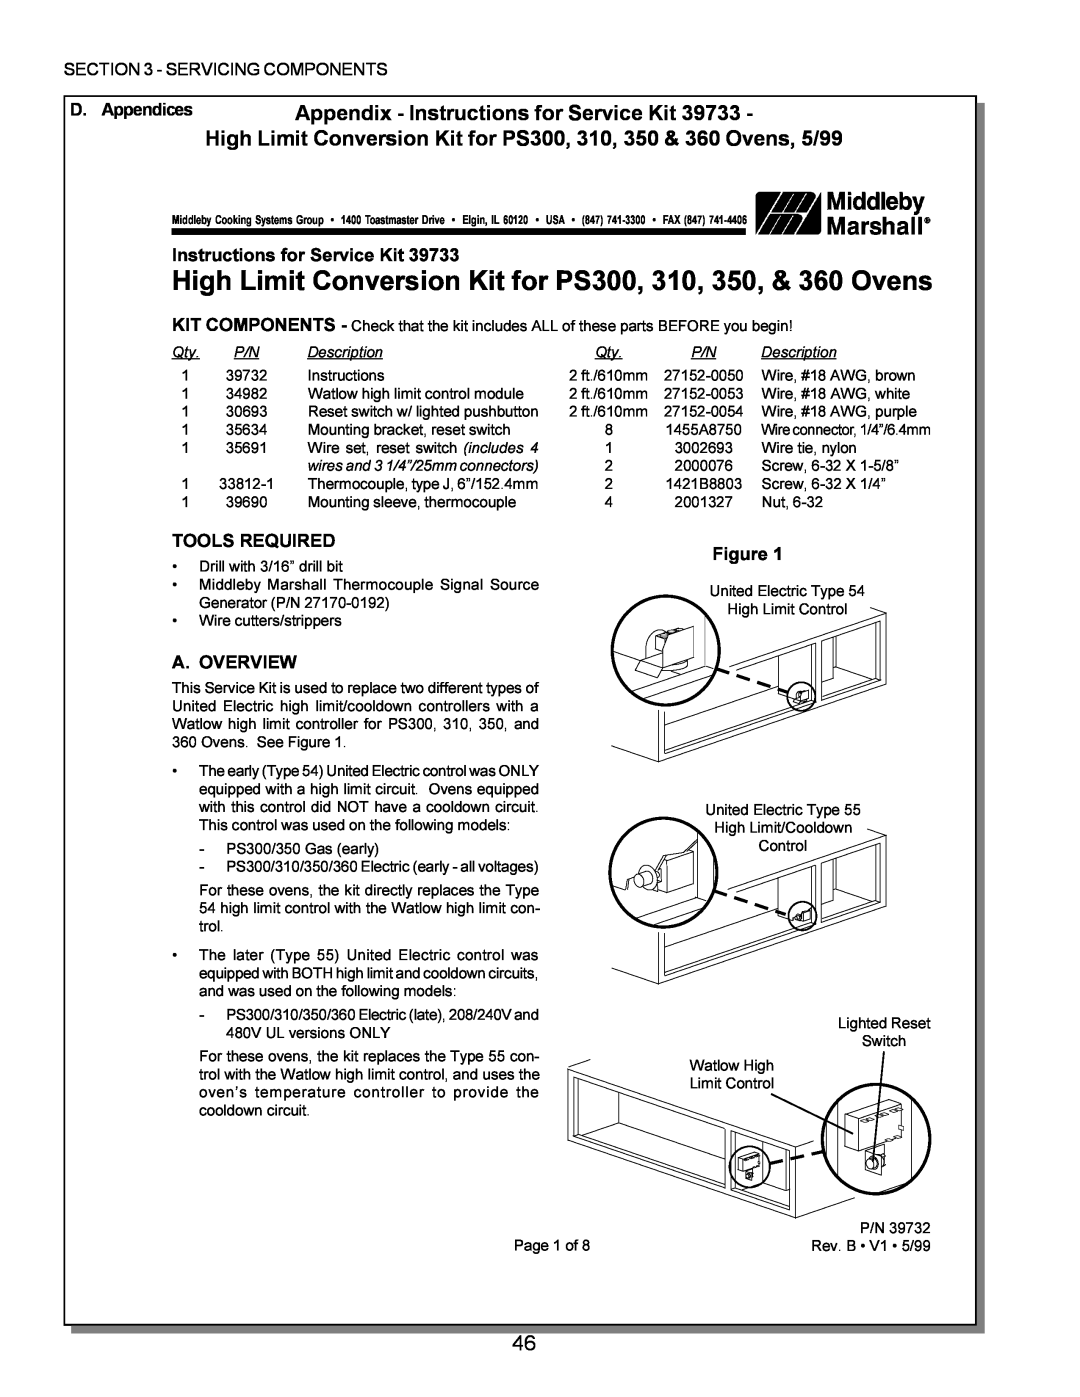 Middleby Marshall PS224 PS310 High Limit Conversion Kit for PS300, 310, 350, & 360 Ovens, Instructions for Service Kit 